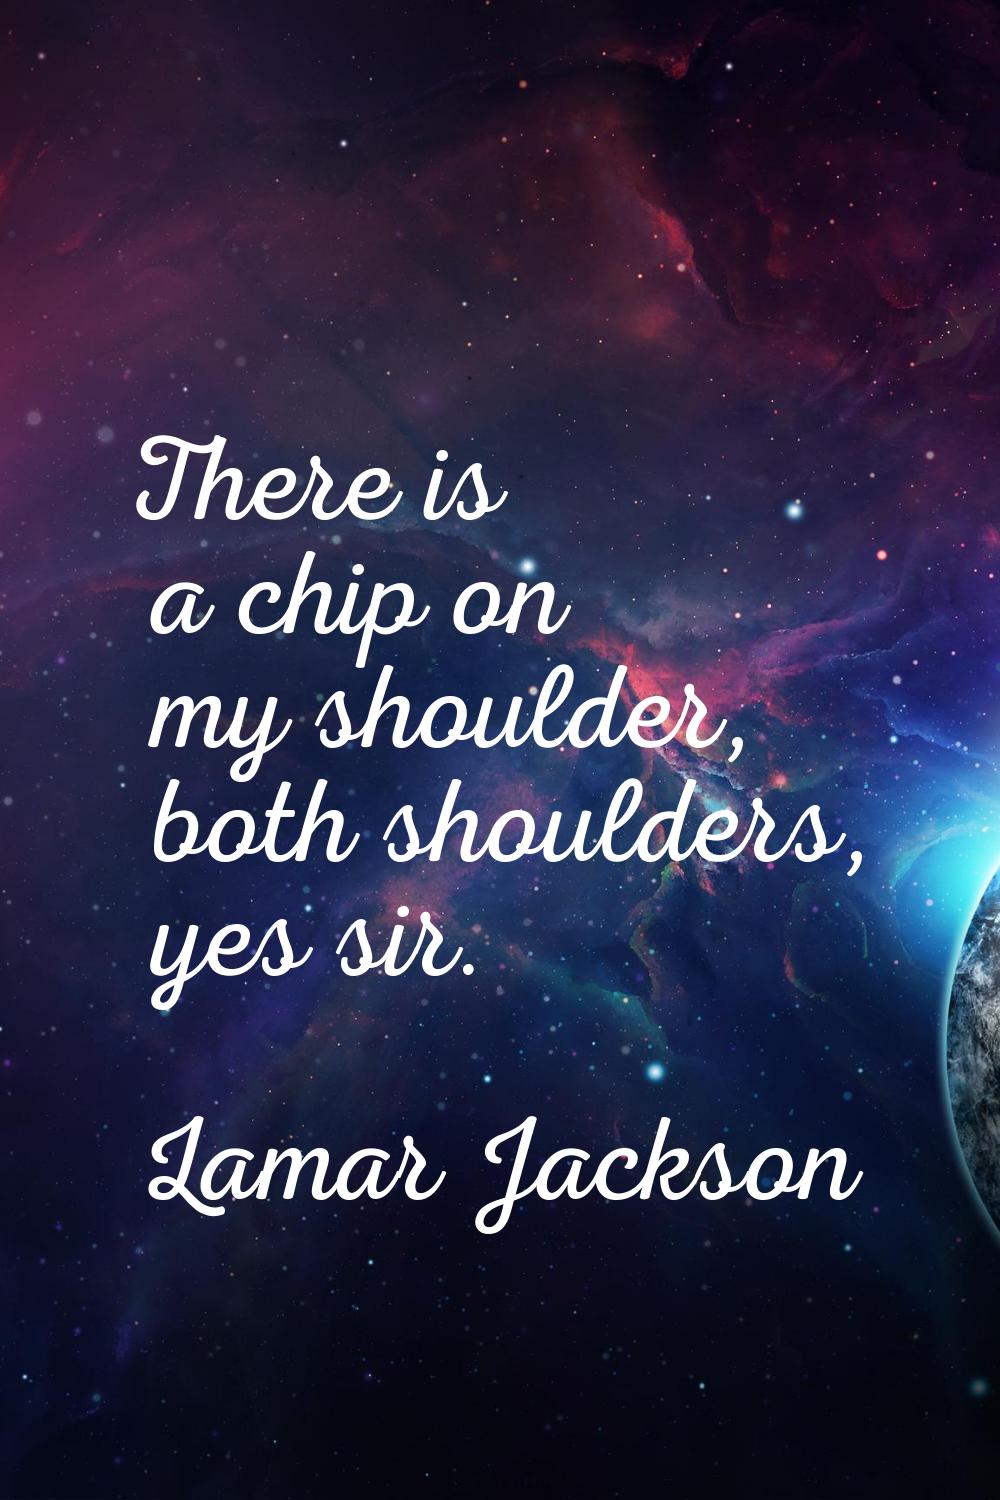 There is a chip on my shoulder, both shoulders, yes sir.